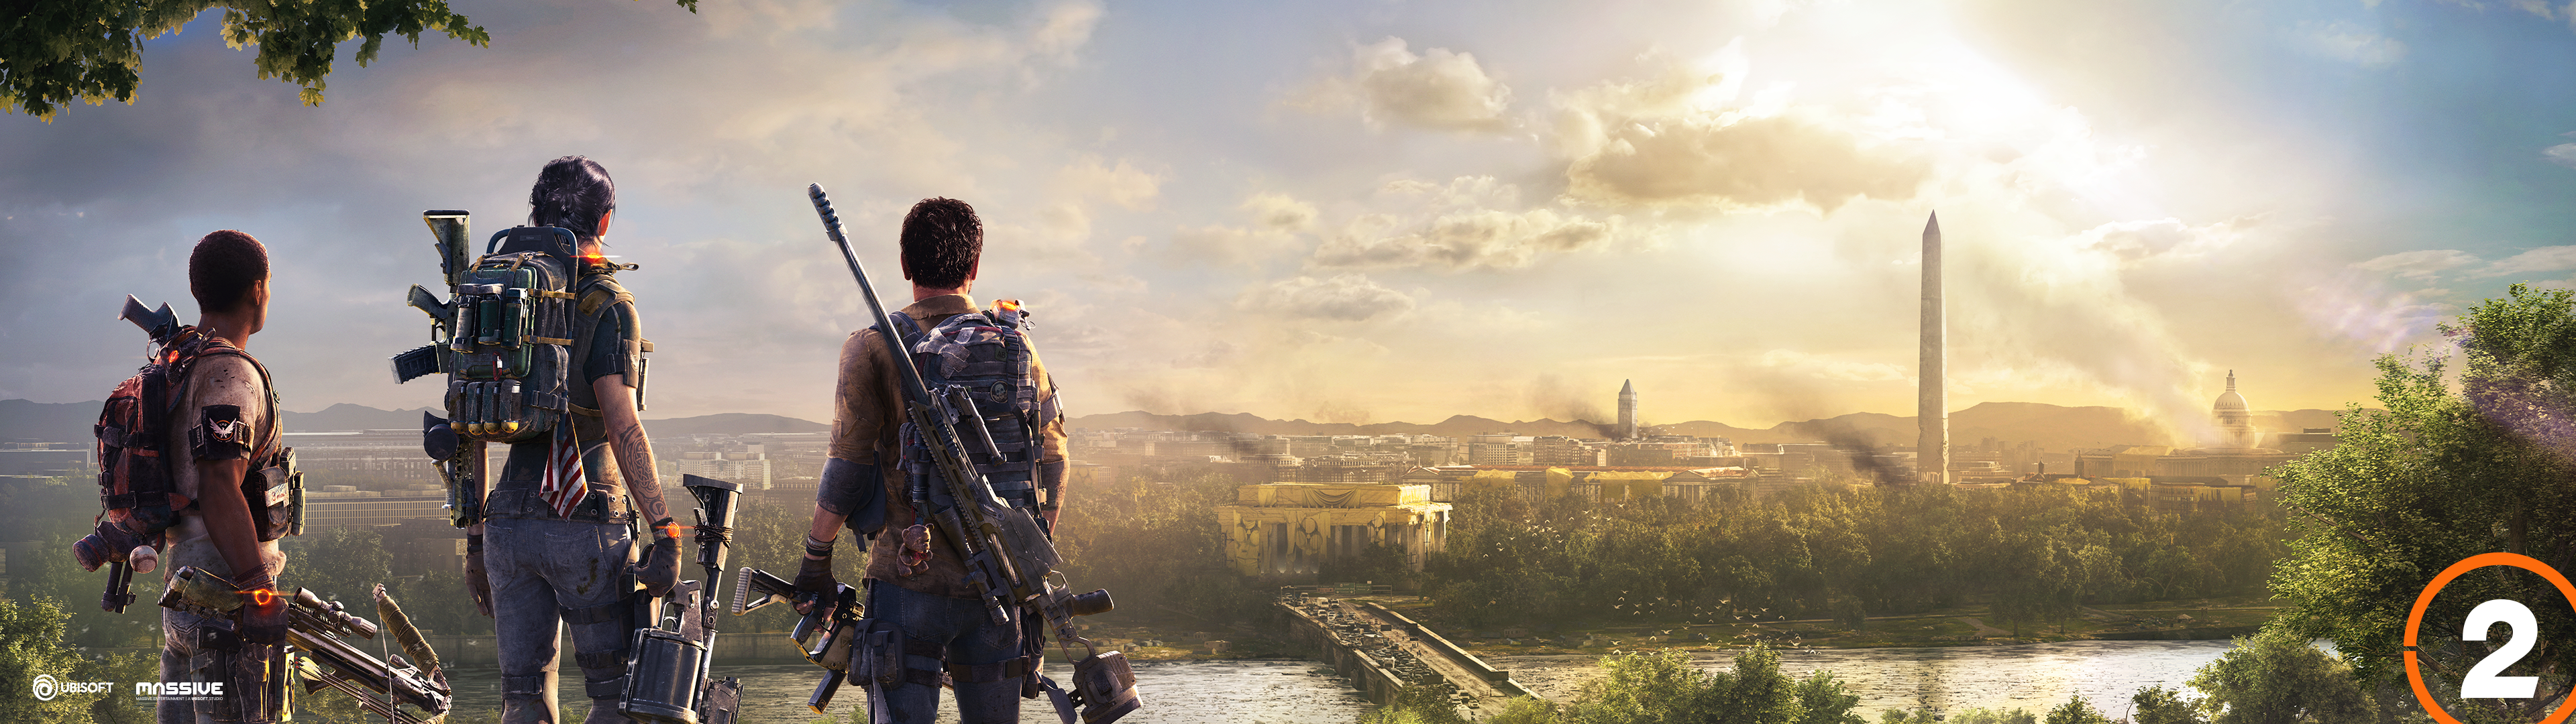 General 3840x1080 Tom Clancy's The Division 2 Ubisoft video games concept art dual monitors Tom Clancy's The Division